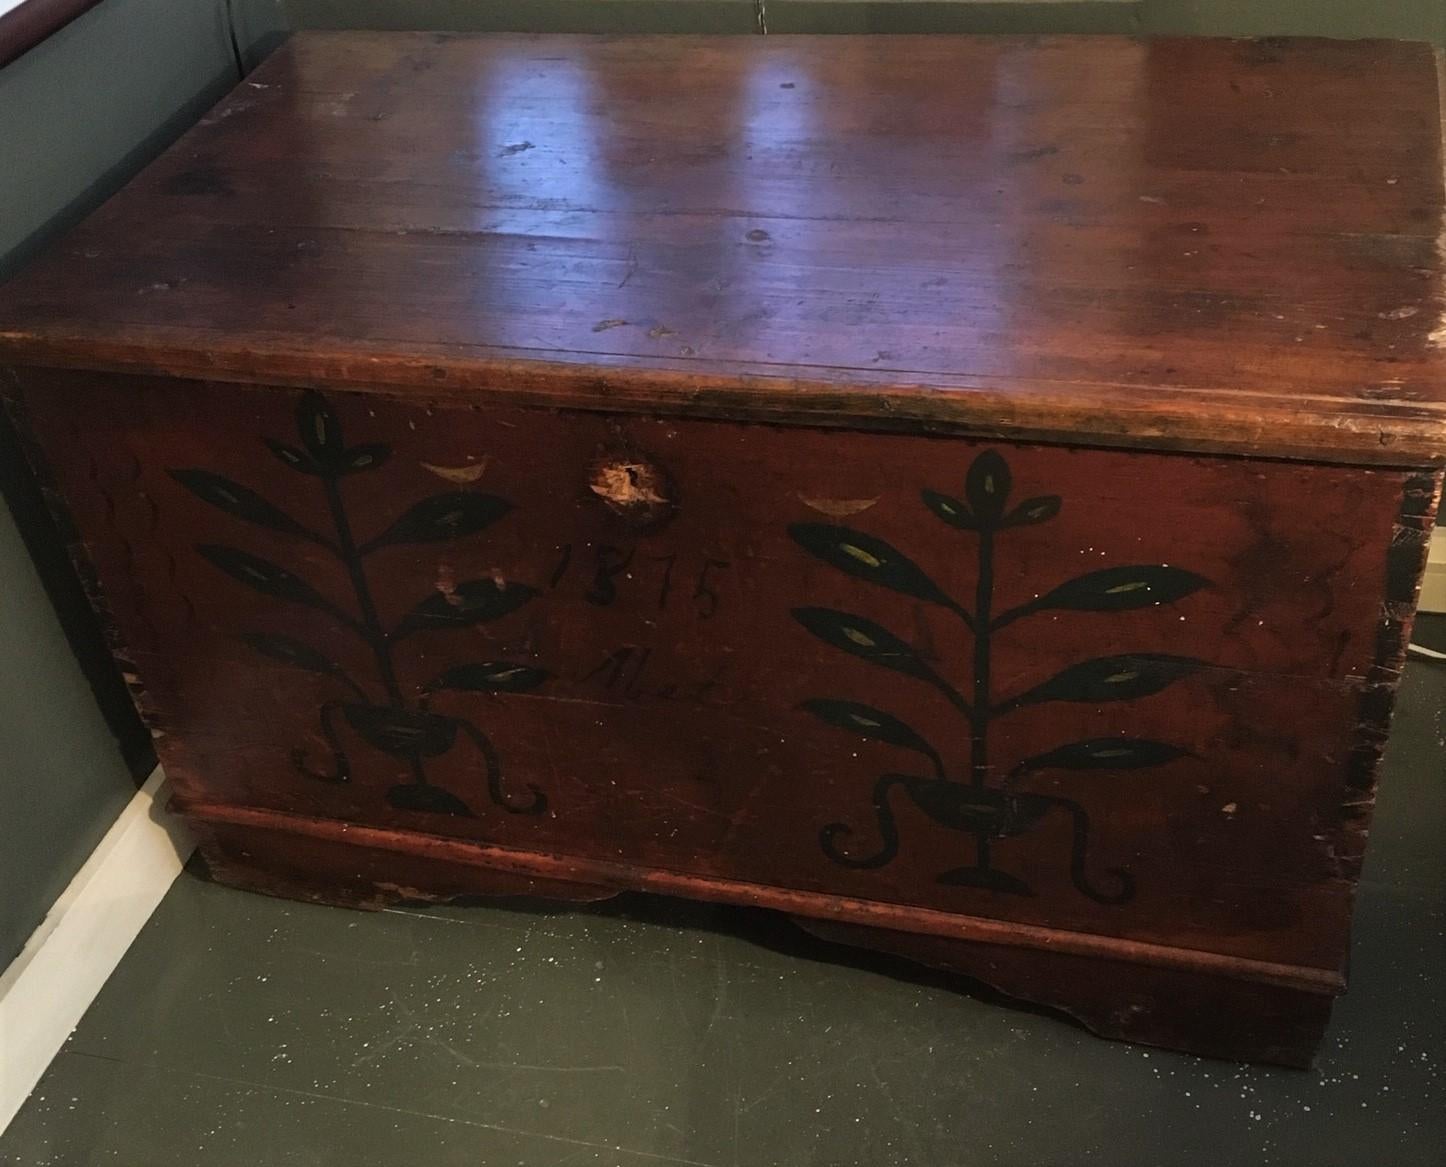 18th century American pine decorated blanket chest, probably from New England, circa 1770 having a dovetailed case on wide bracket feet, the lid held by long strap hinges; in original red paint with later green painted foliage decorations with